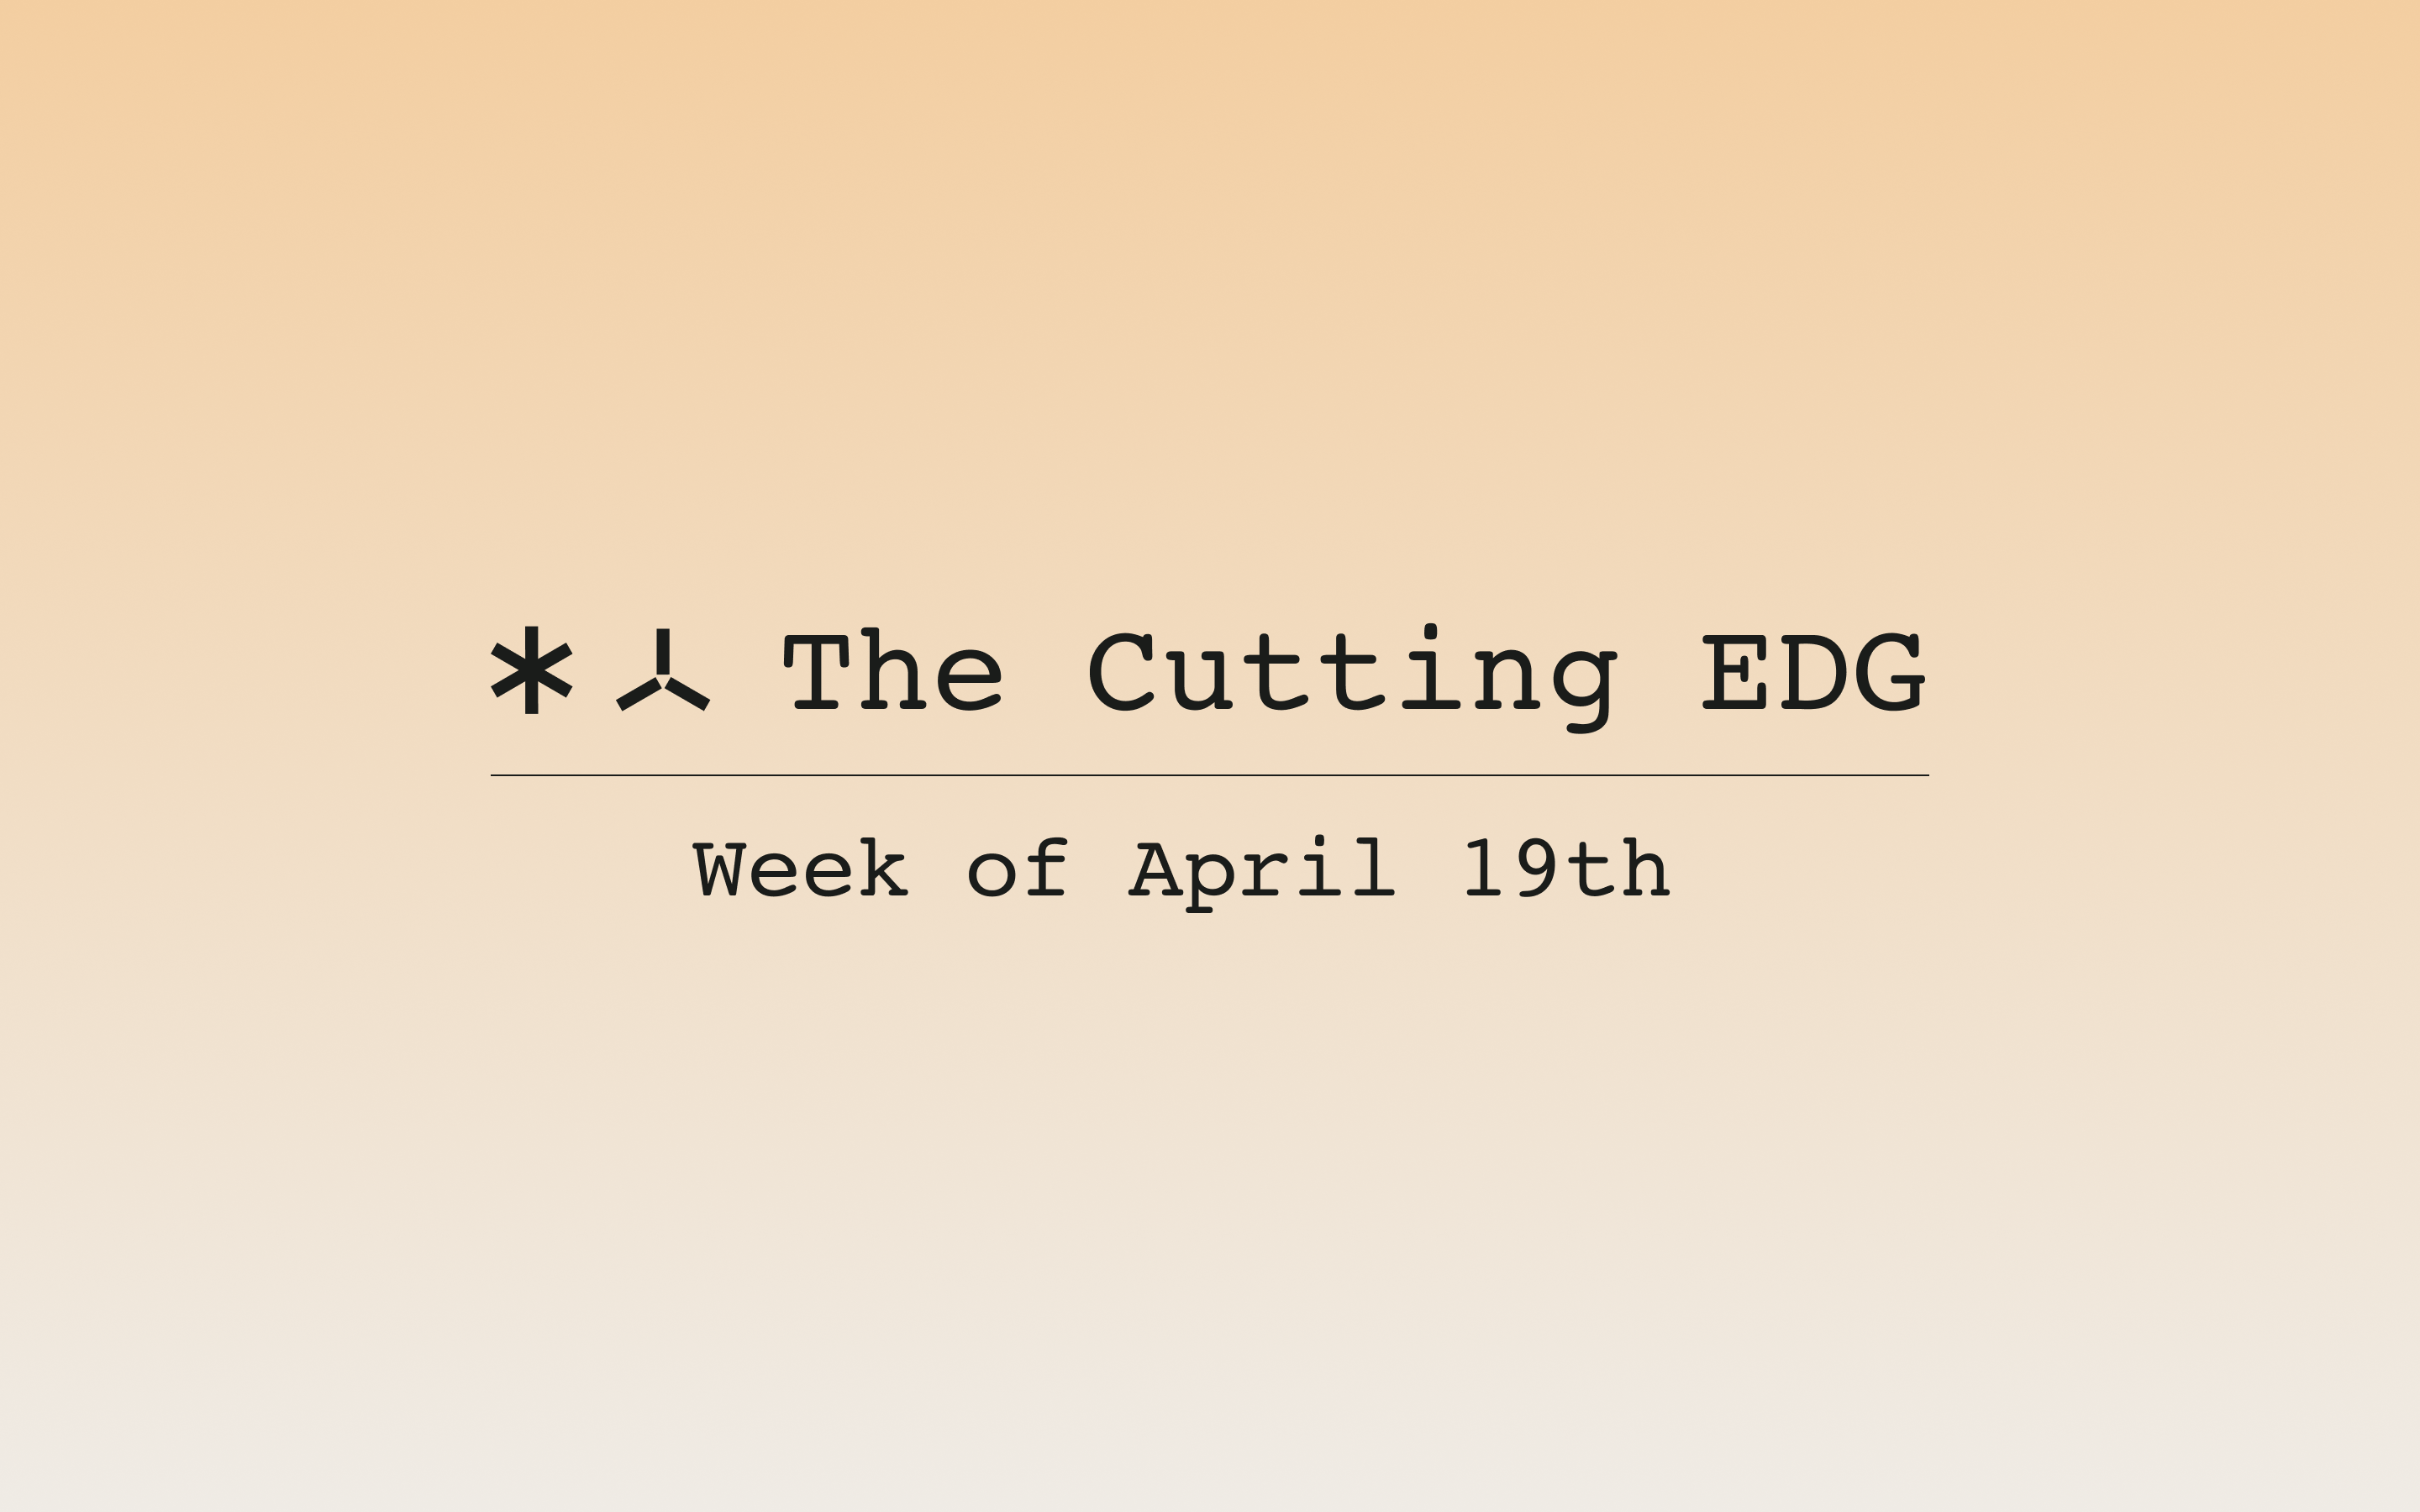 The Cutting EDG: Week of April 19th